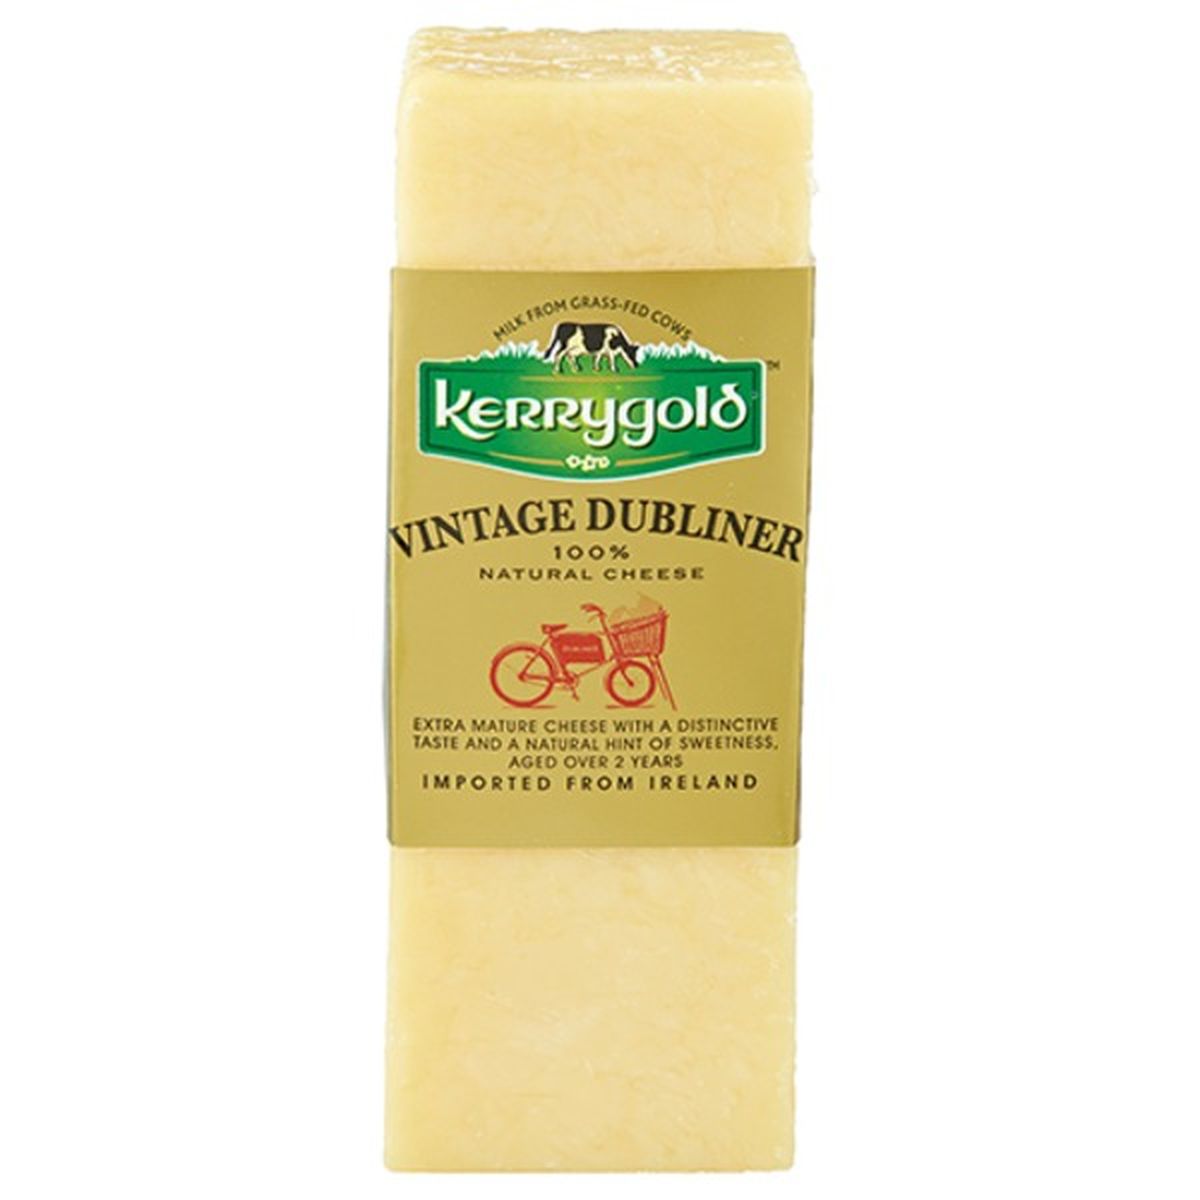 Calories in Kerrygold Vintage Dubliner Irish Cheddar Cheese